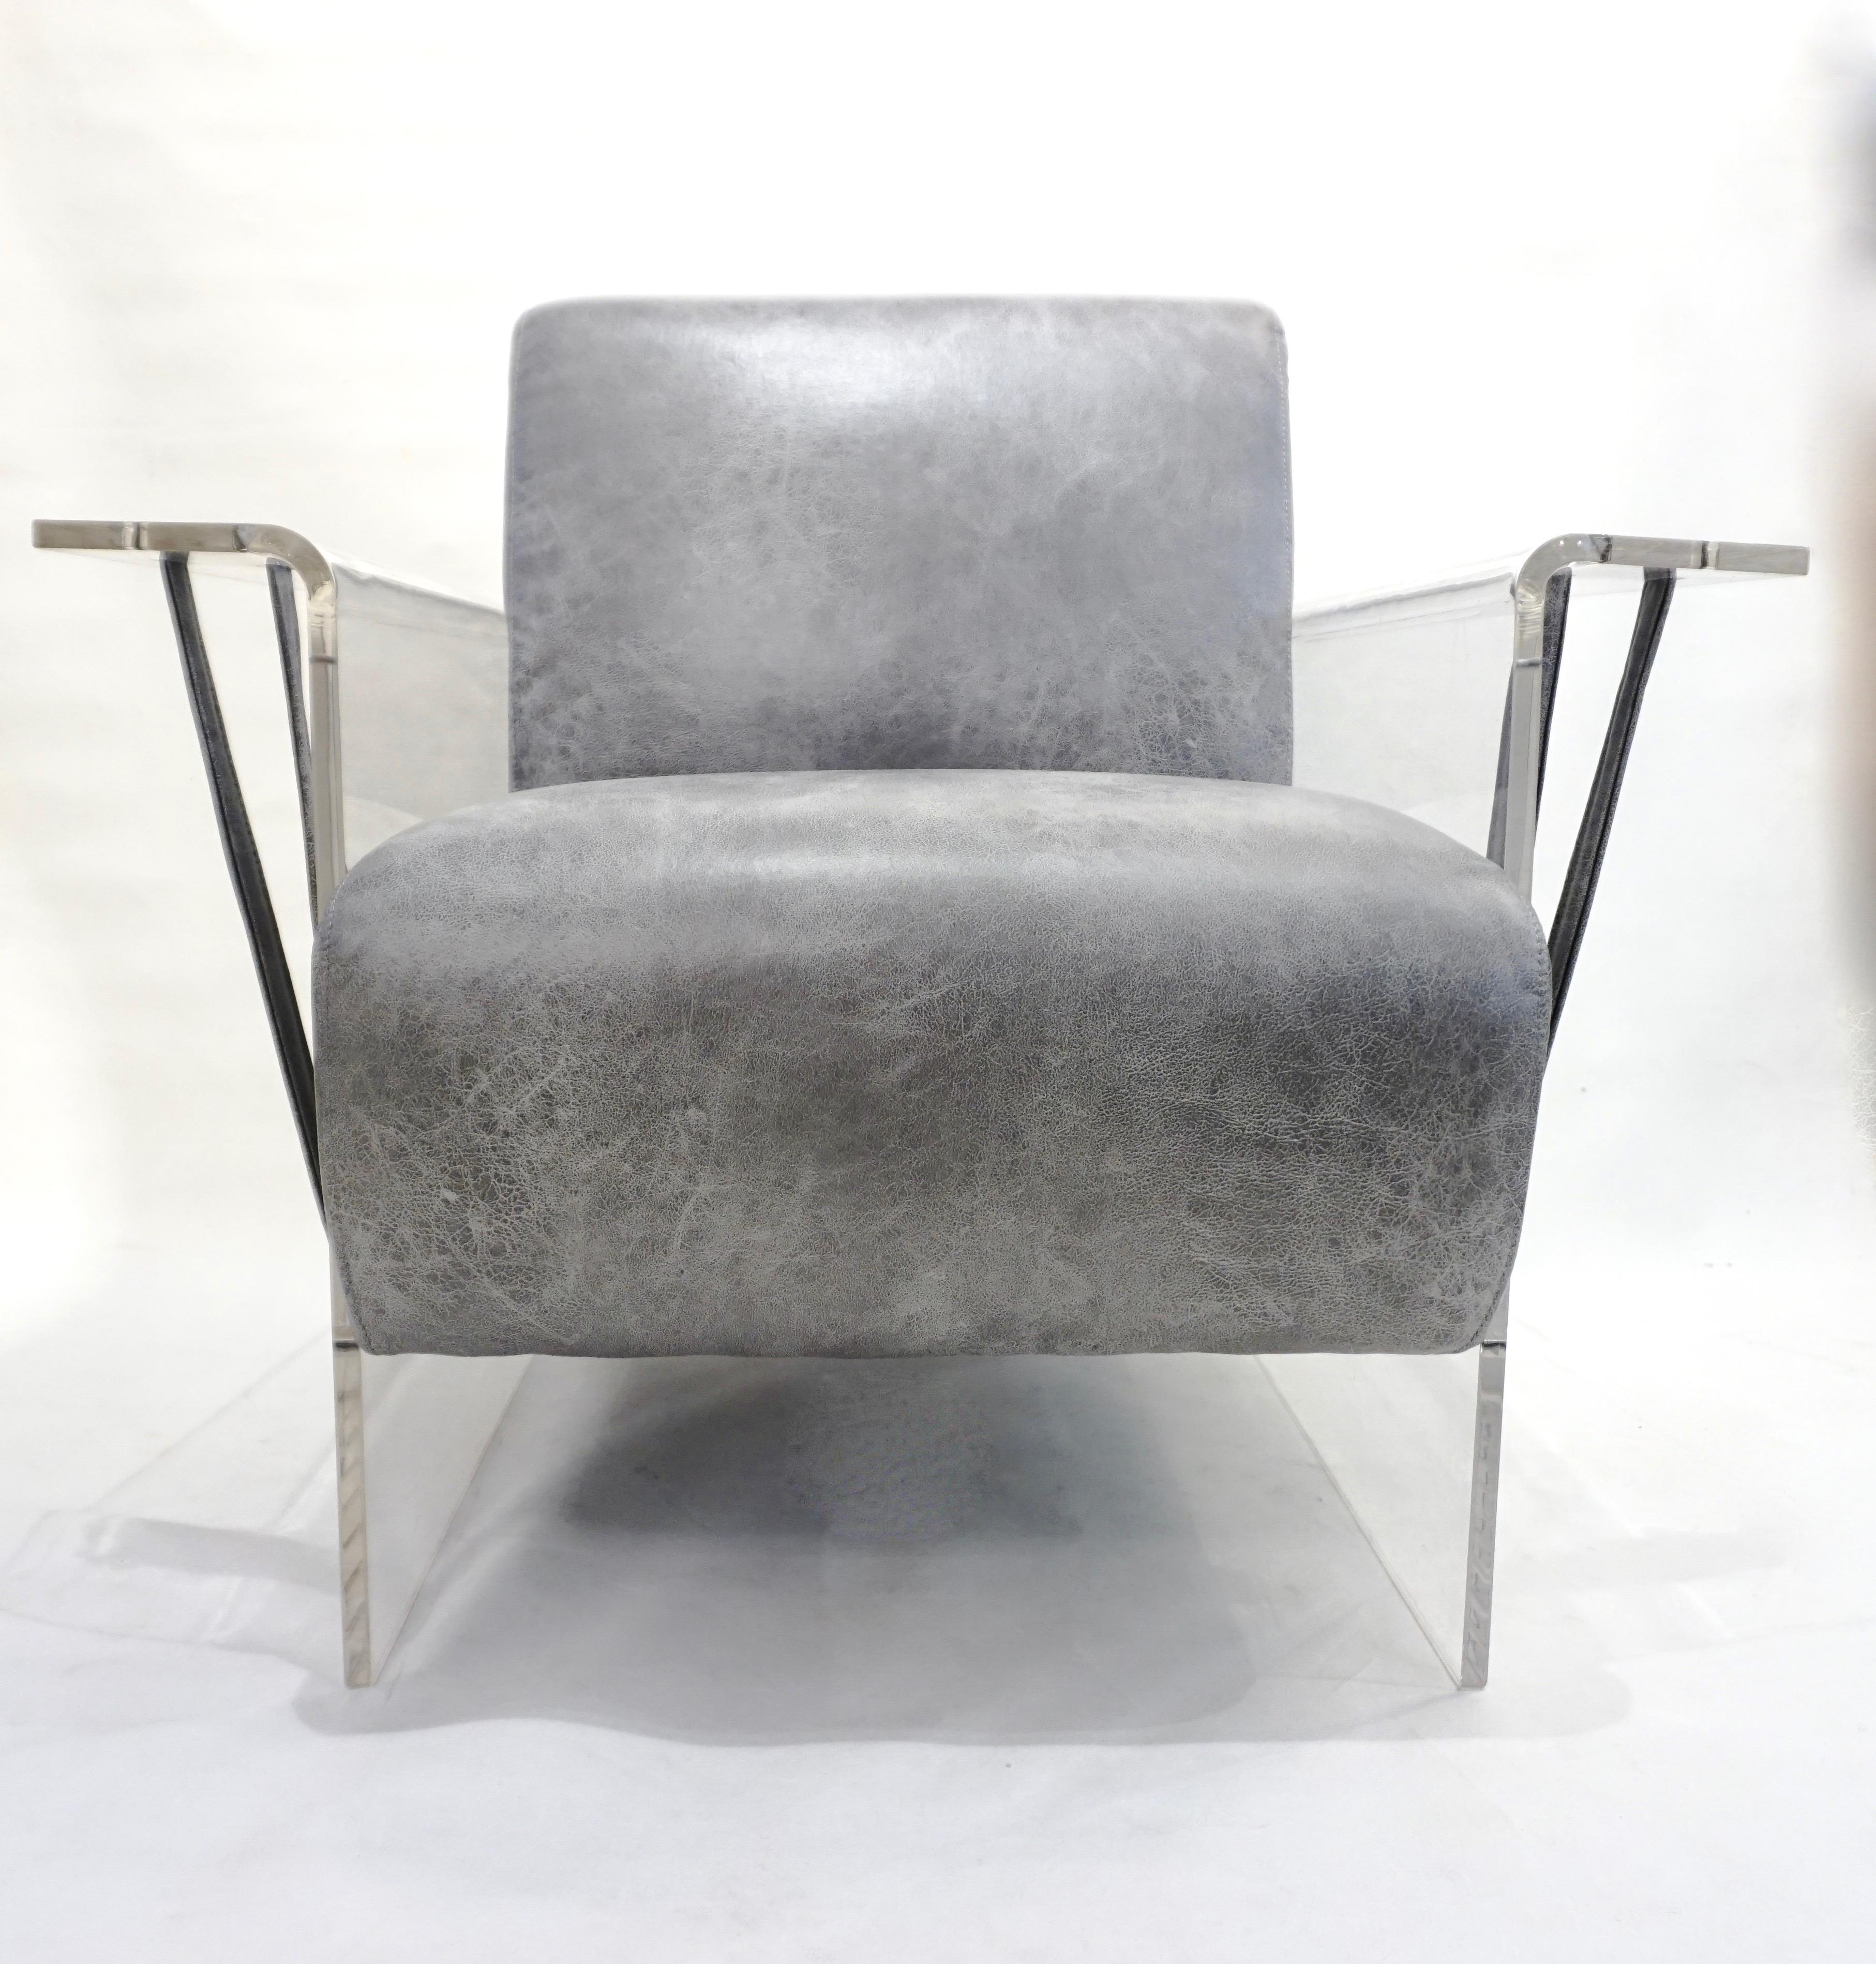 Bespoke Modernist Lucite Acrylic Lounge Armchair in Light Gray Faux Leather 1